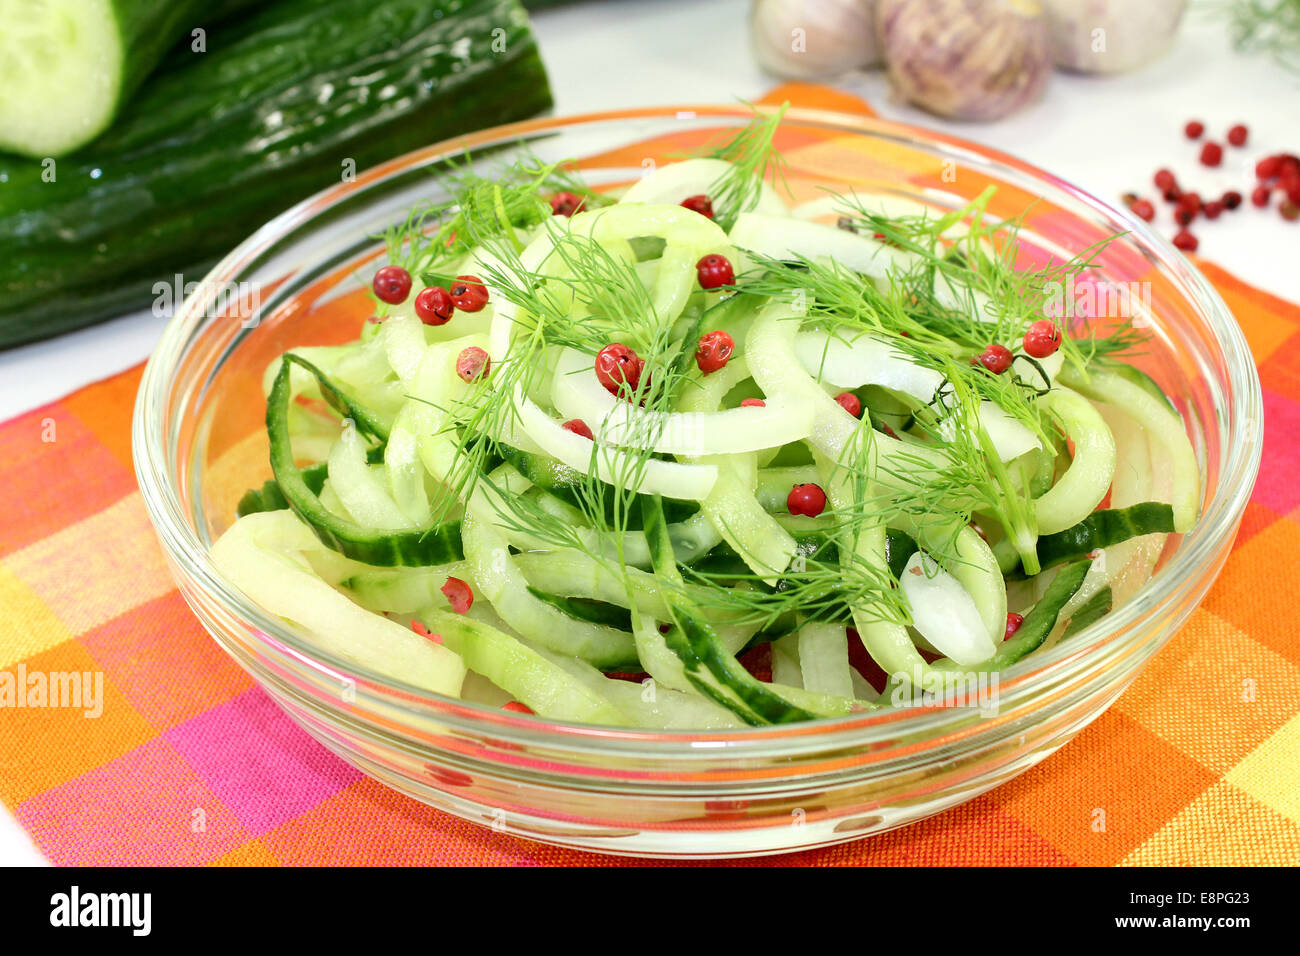 a bowl of cucumber salad with dill and red pepper berries Stock Photo